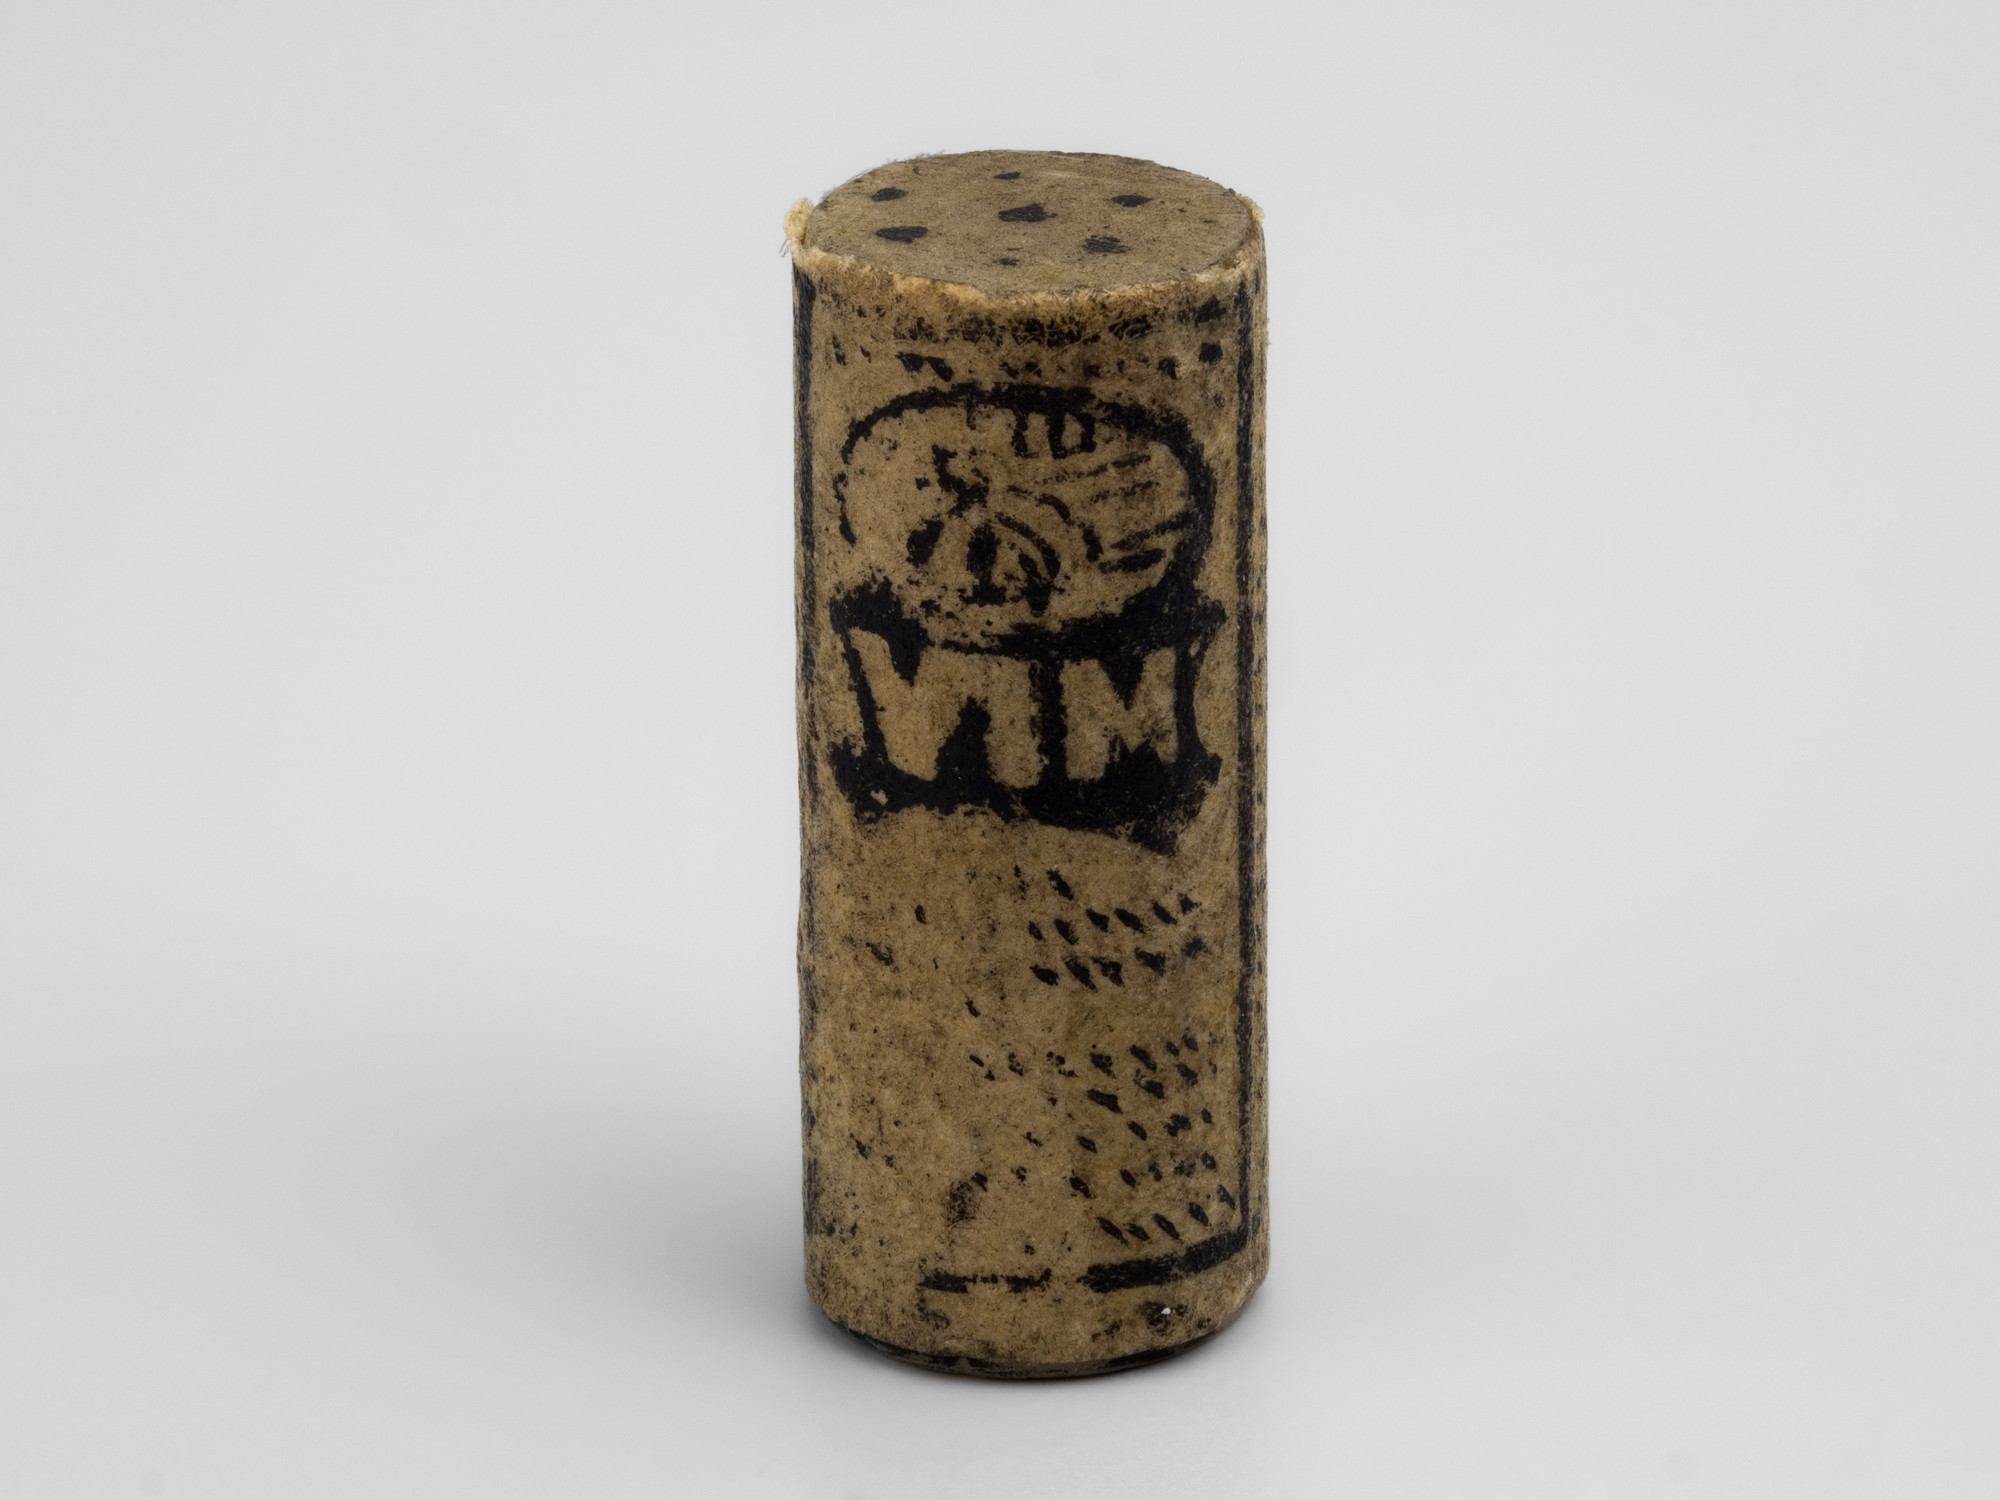 Miniature wooden tube of Vim cleaning product with paper label